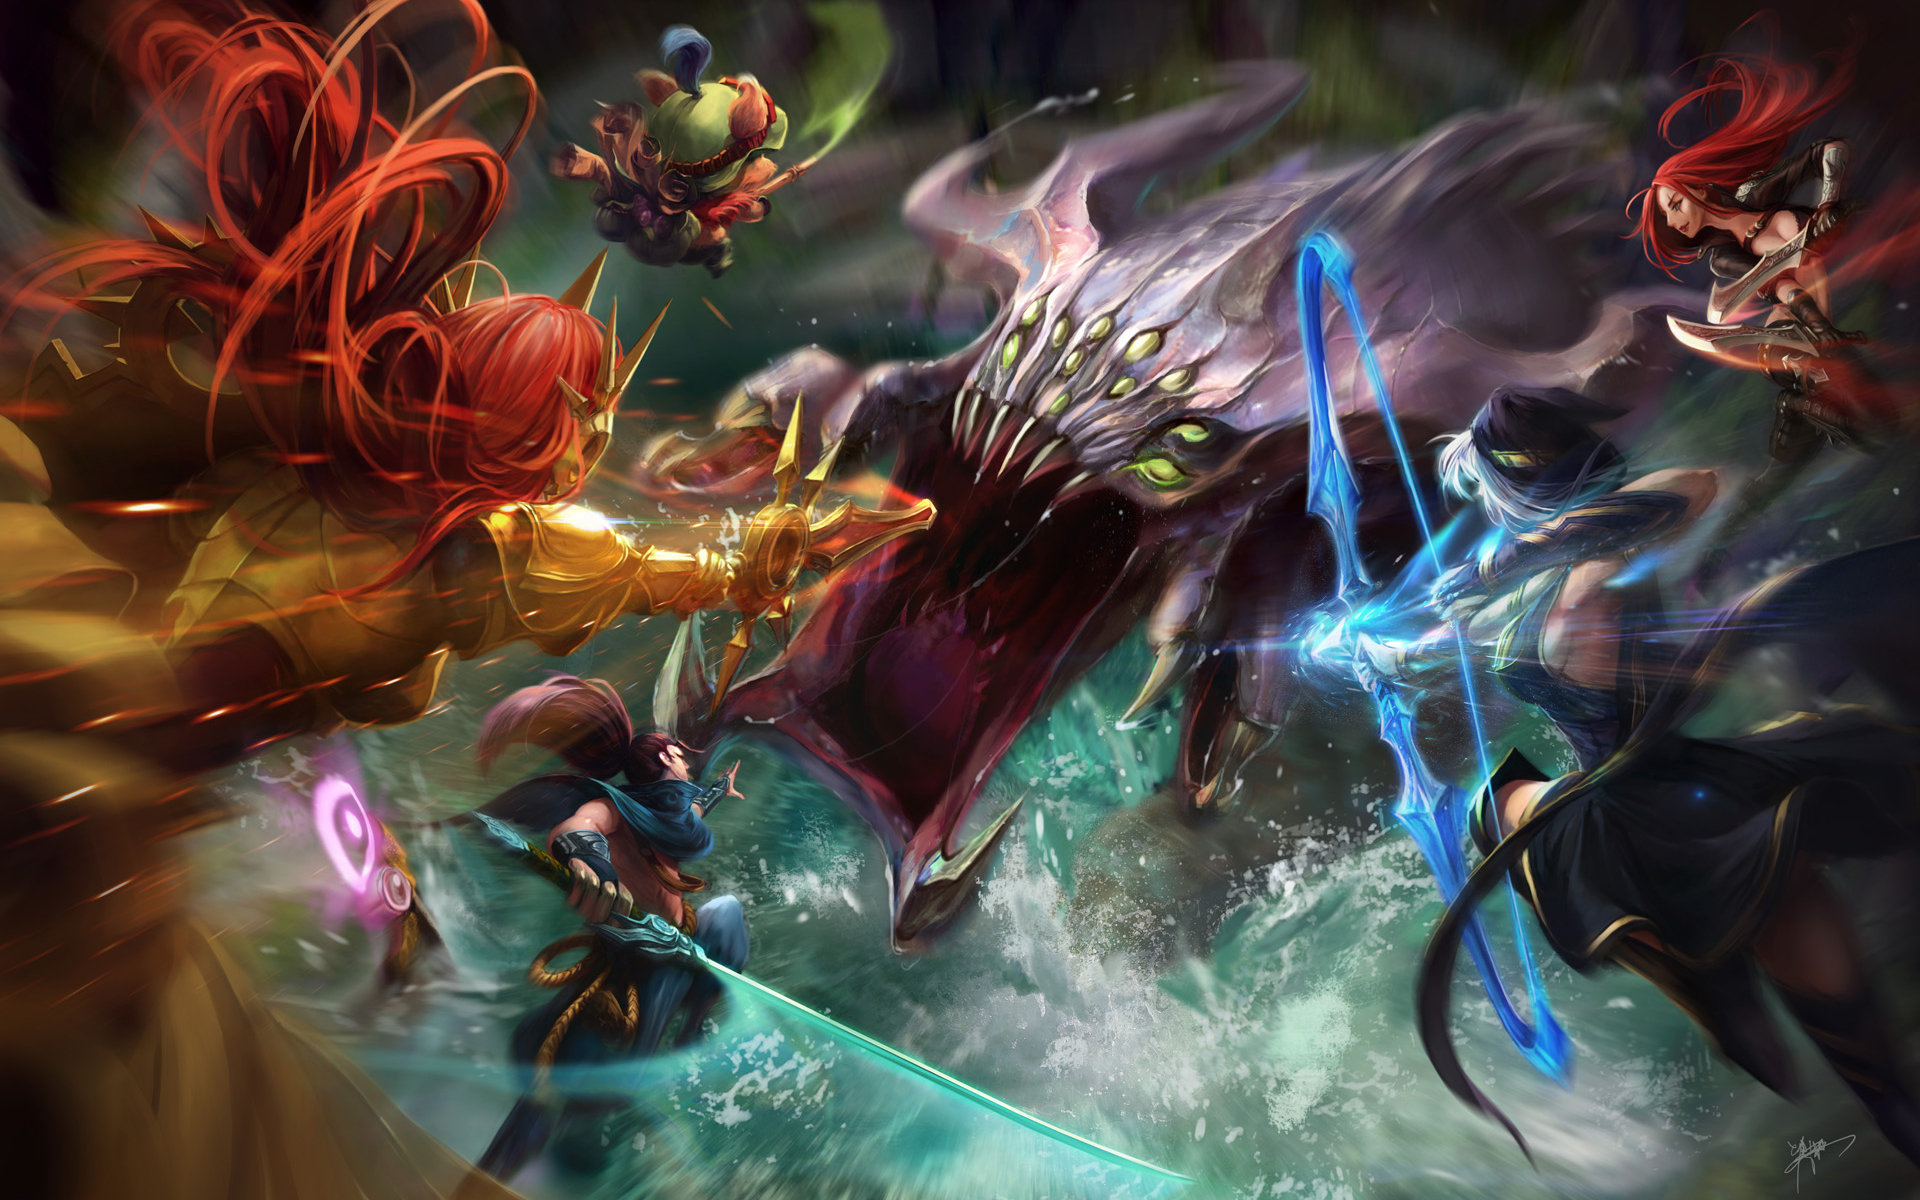 video game, league of legends, ashe (league of legends), baron nashor (league of legends), katarina (league of legends), leona (league of legends), teemo (league of legends), yasuo (league of legends)